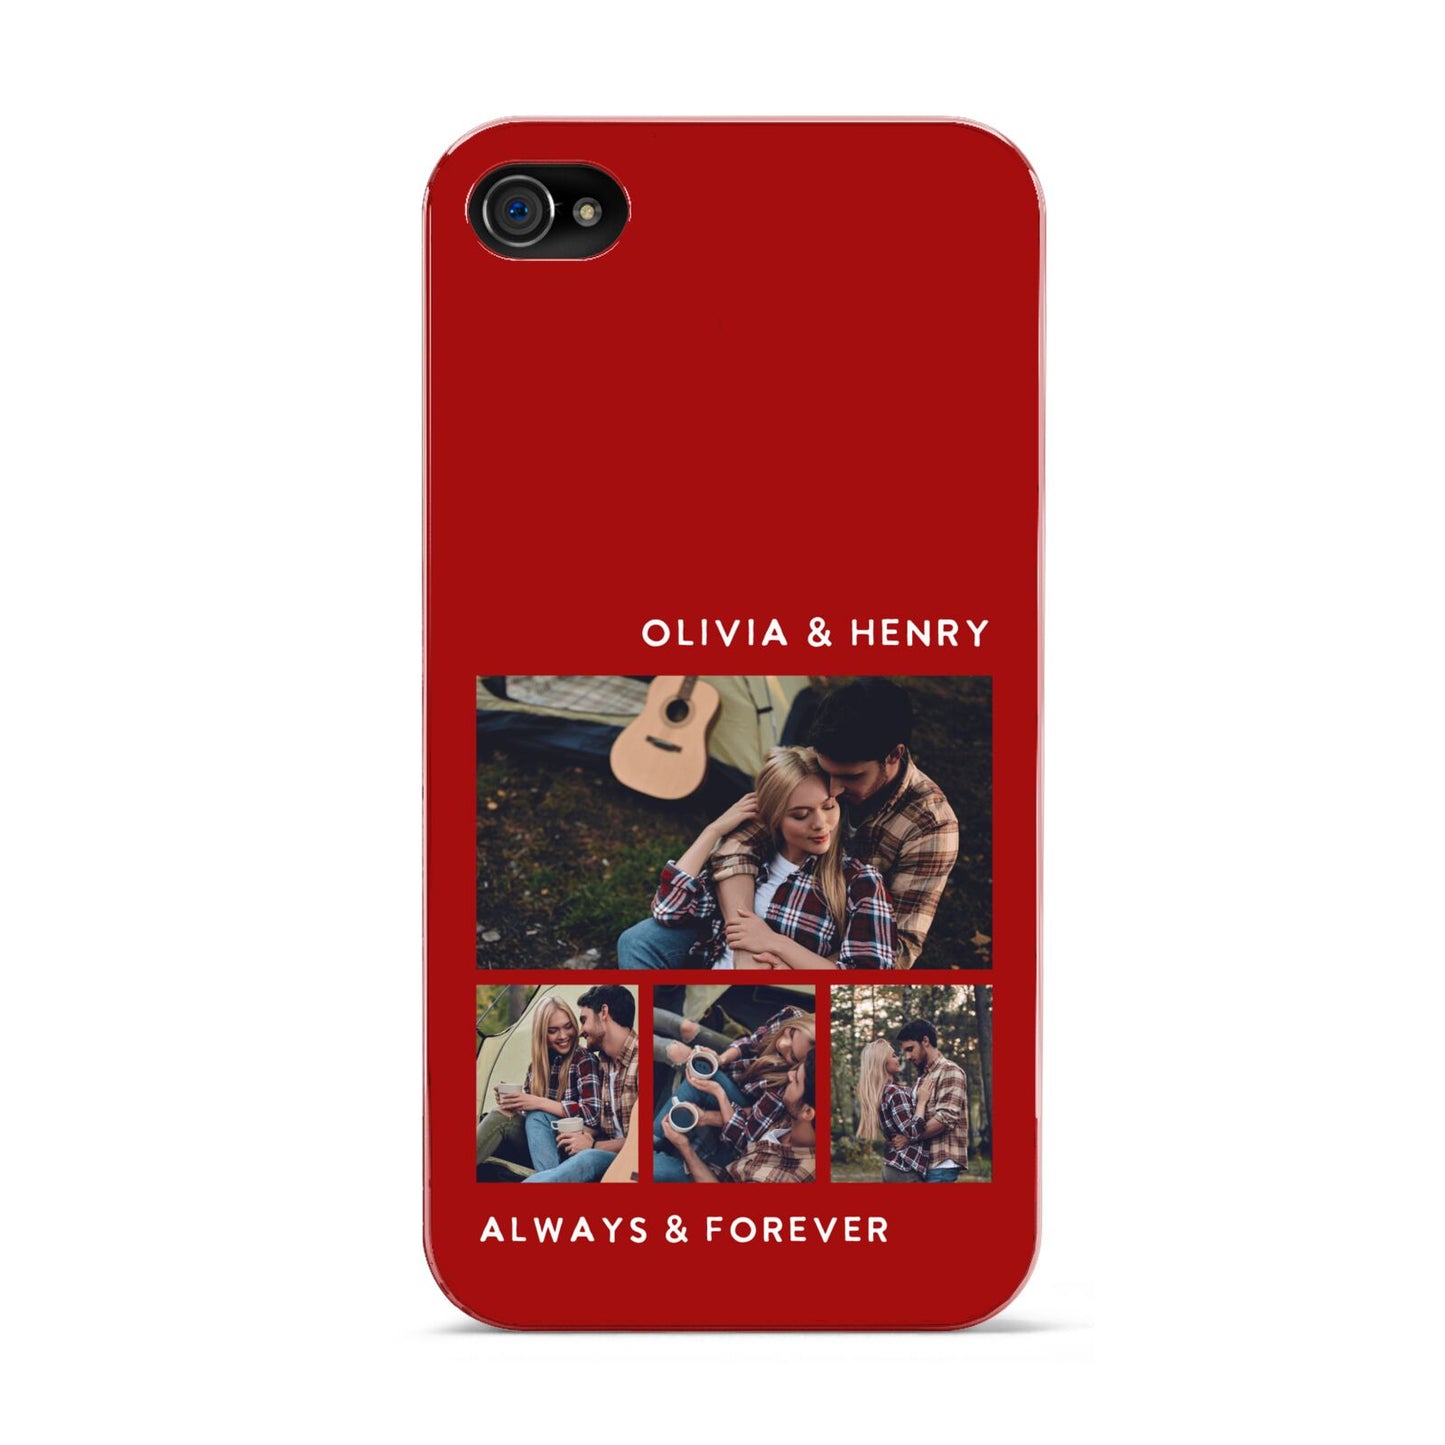 Couples Photo Collage Personalised Apple iPhone 4s Case